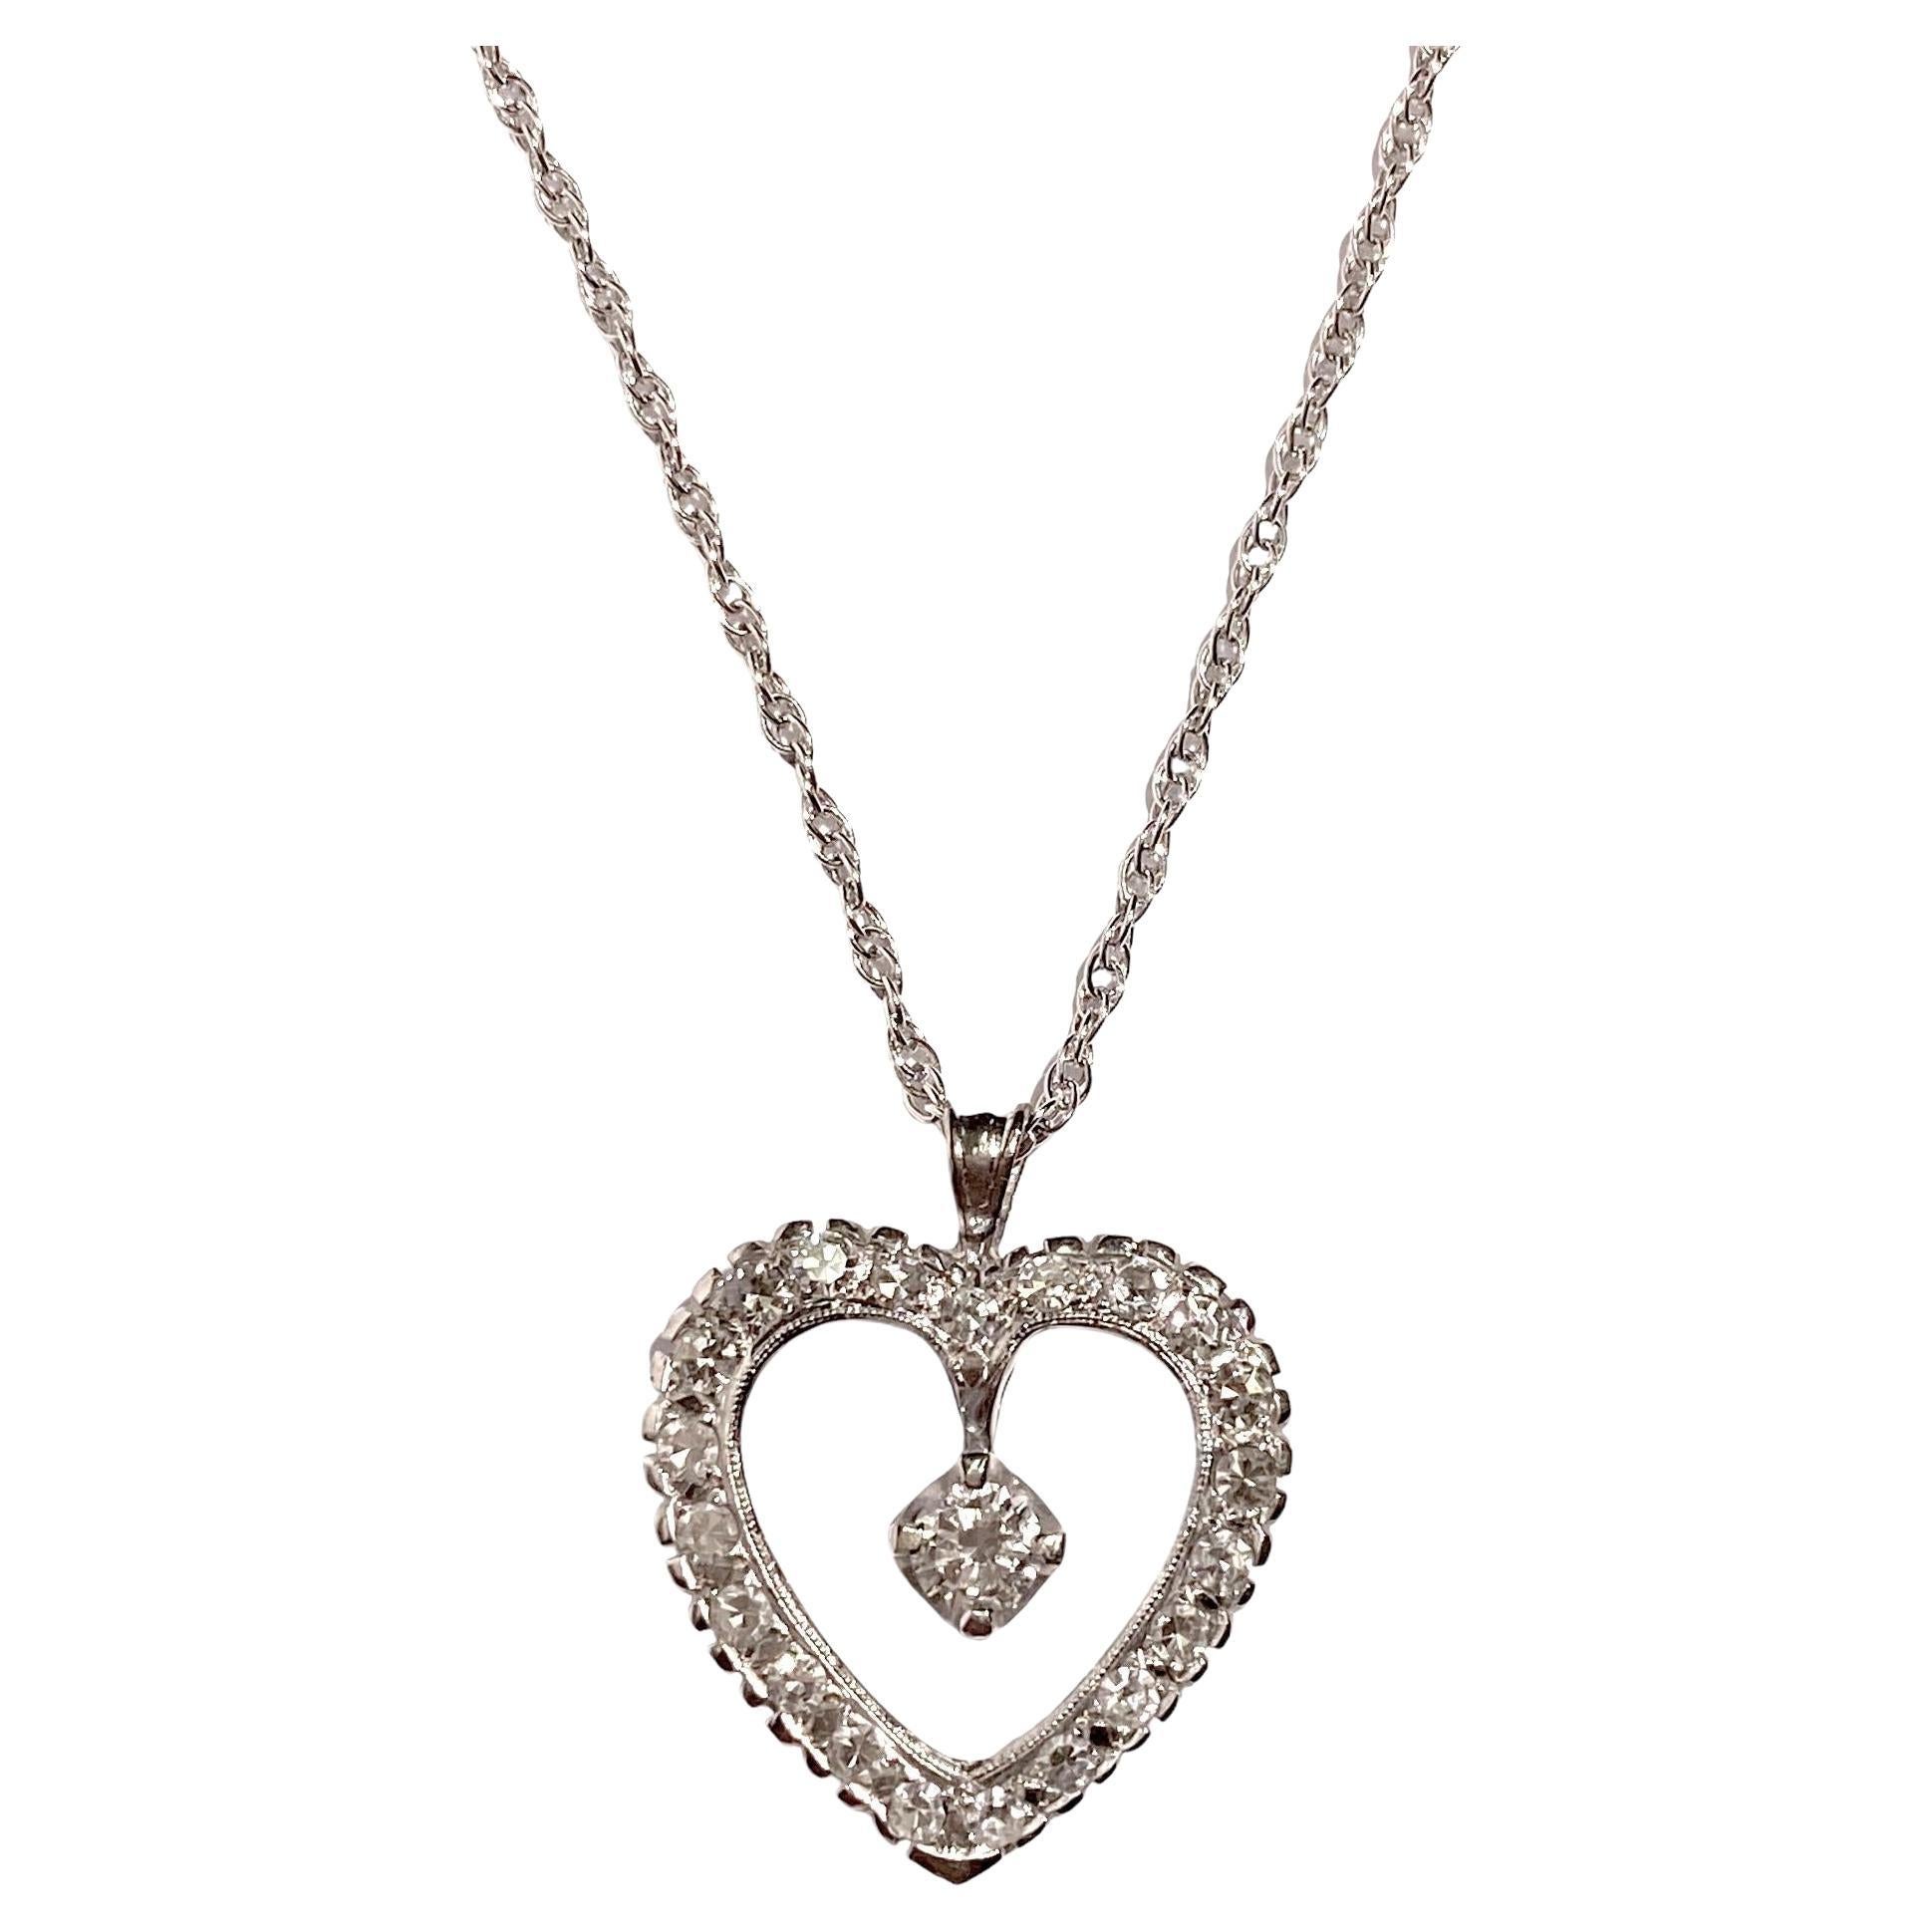 Vintage 14K White Gold Diamond Heart Pendant with Chain For Sale